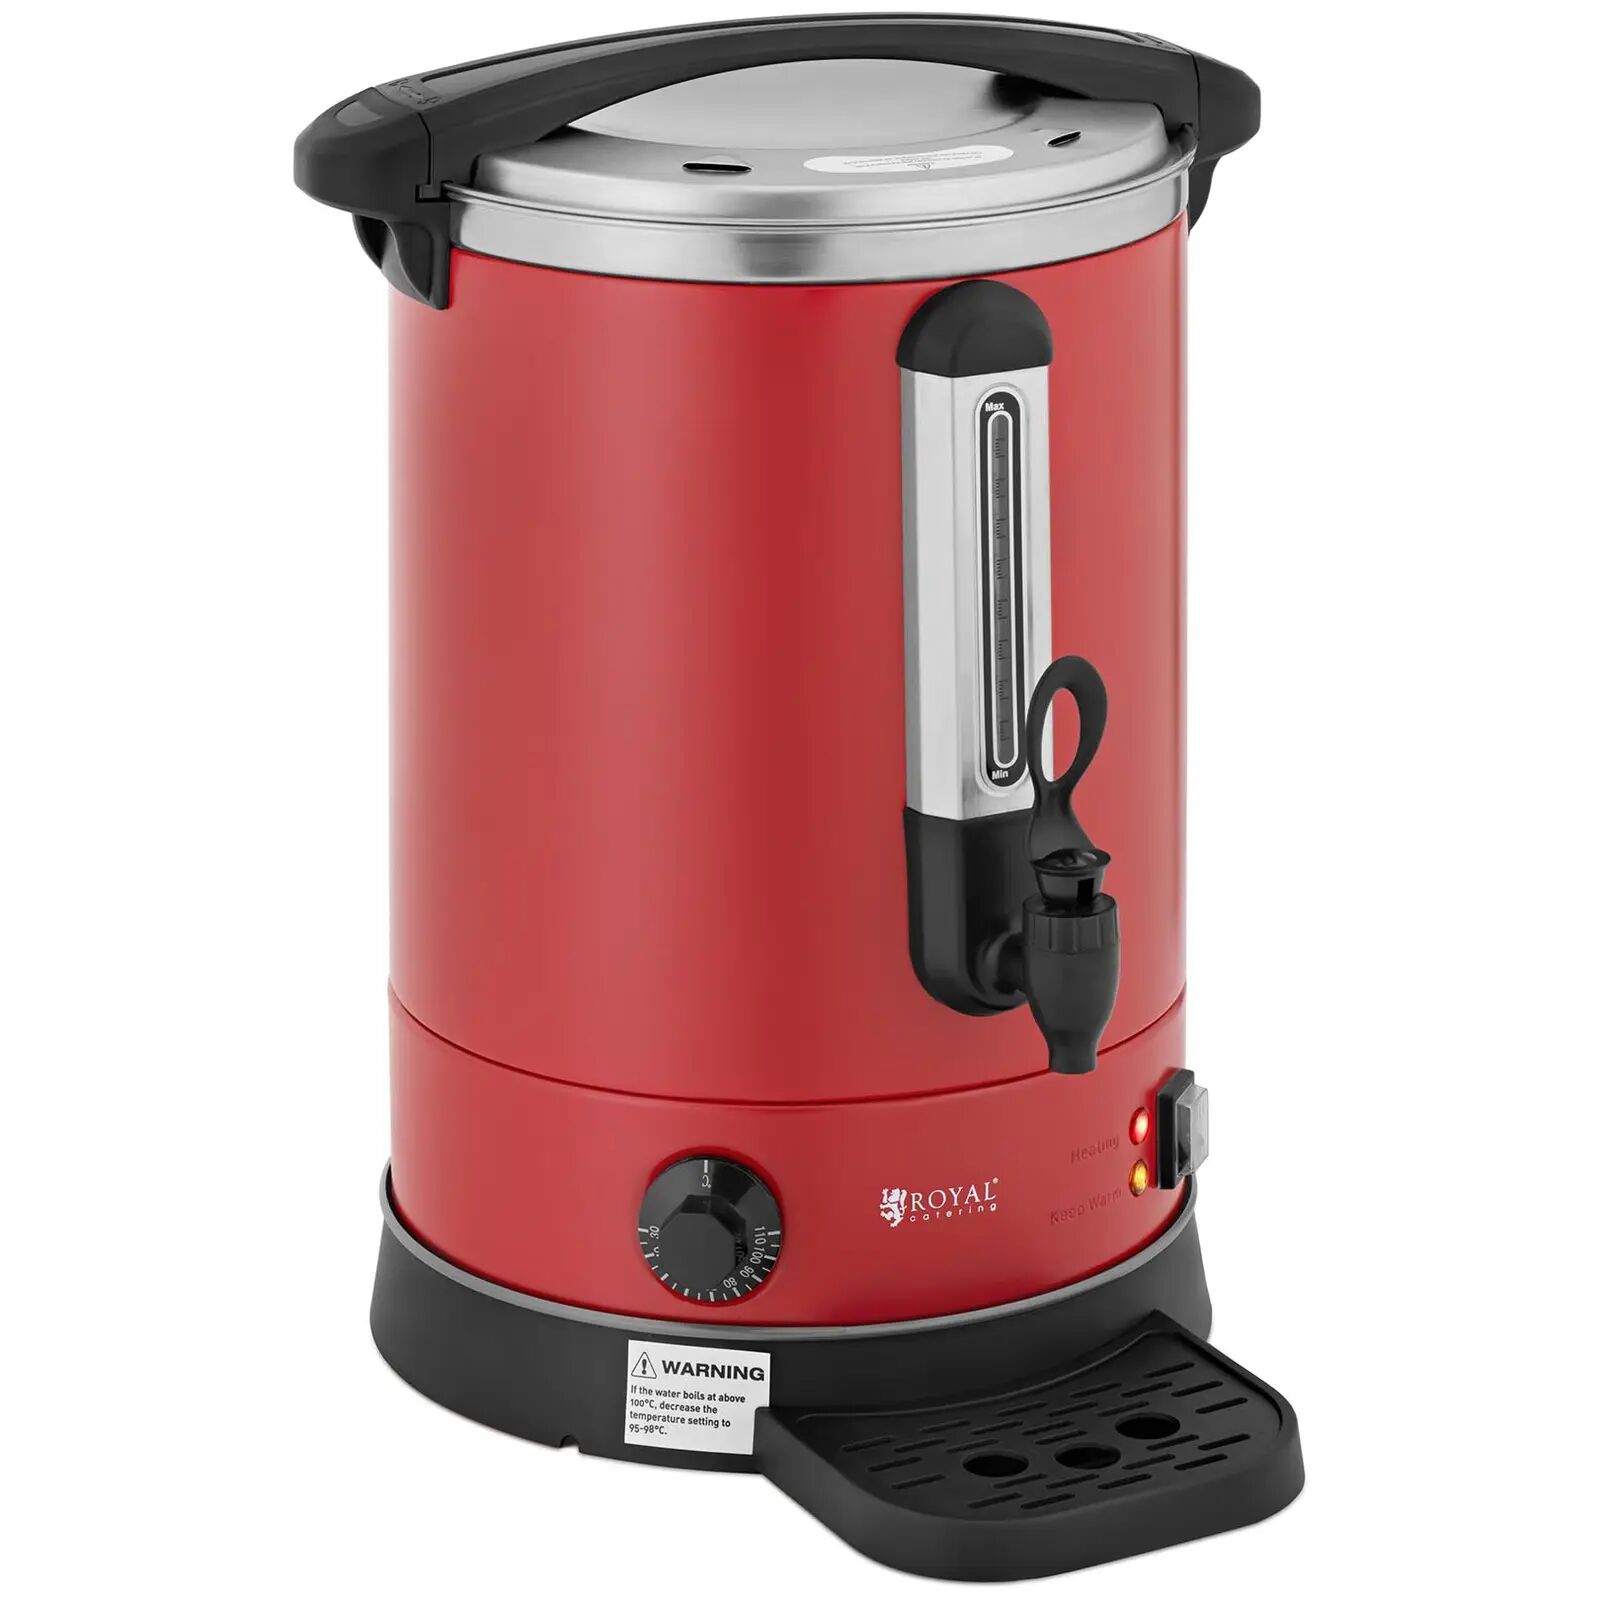 royal catering bollitore professionale - 13,5 litri - 2.500 w - rosso rc-wbdw14cr